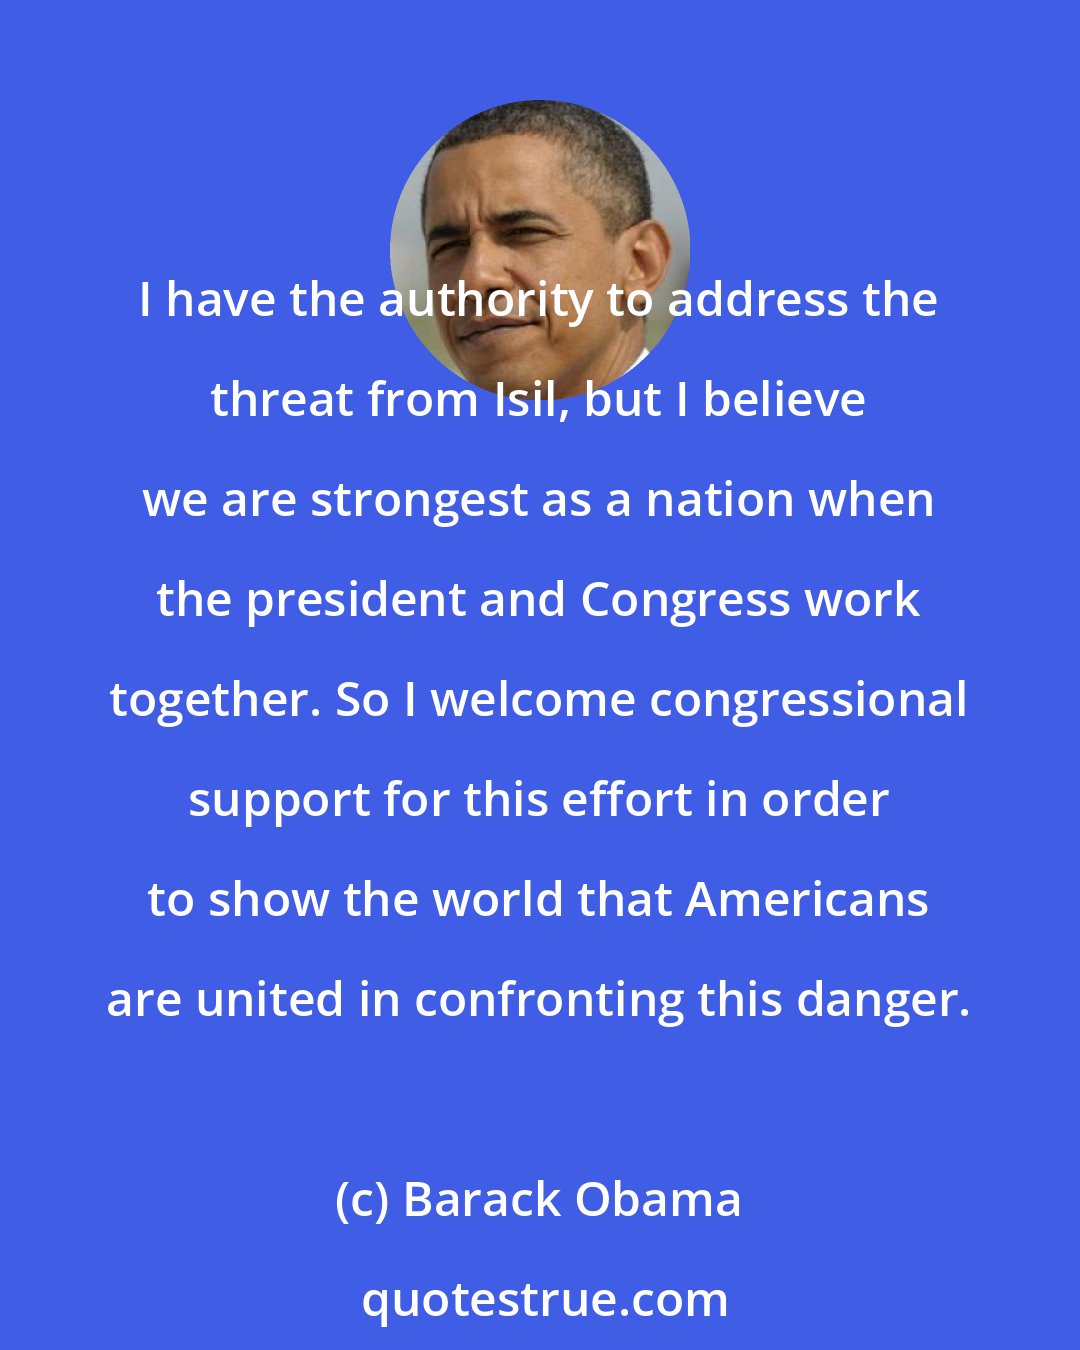 Barack Obama: I have the authority to address the threat from Isil, but I believe we are strongest as a nation when the president and Congress work together. So I welcome congressional support for this effort in order to show the world that Americans are united in confronting this danger.